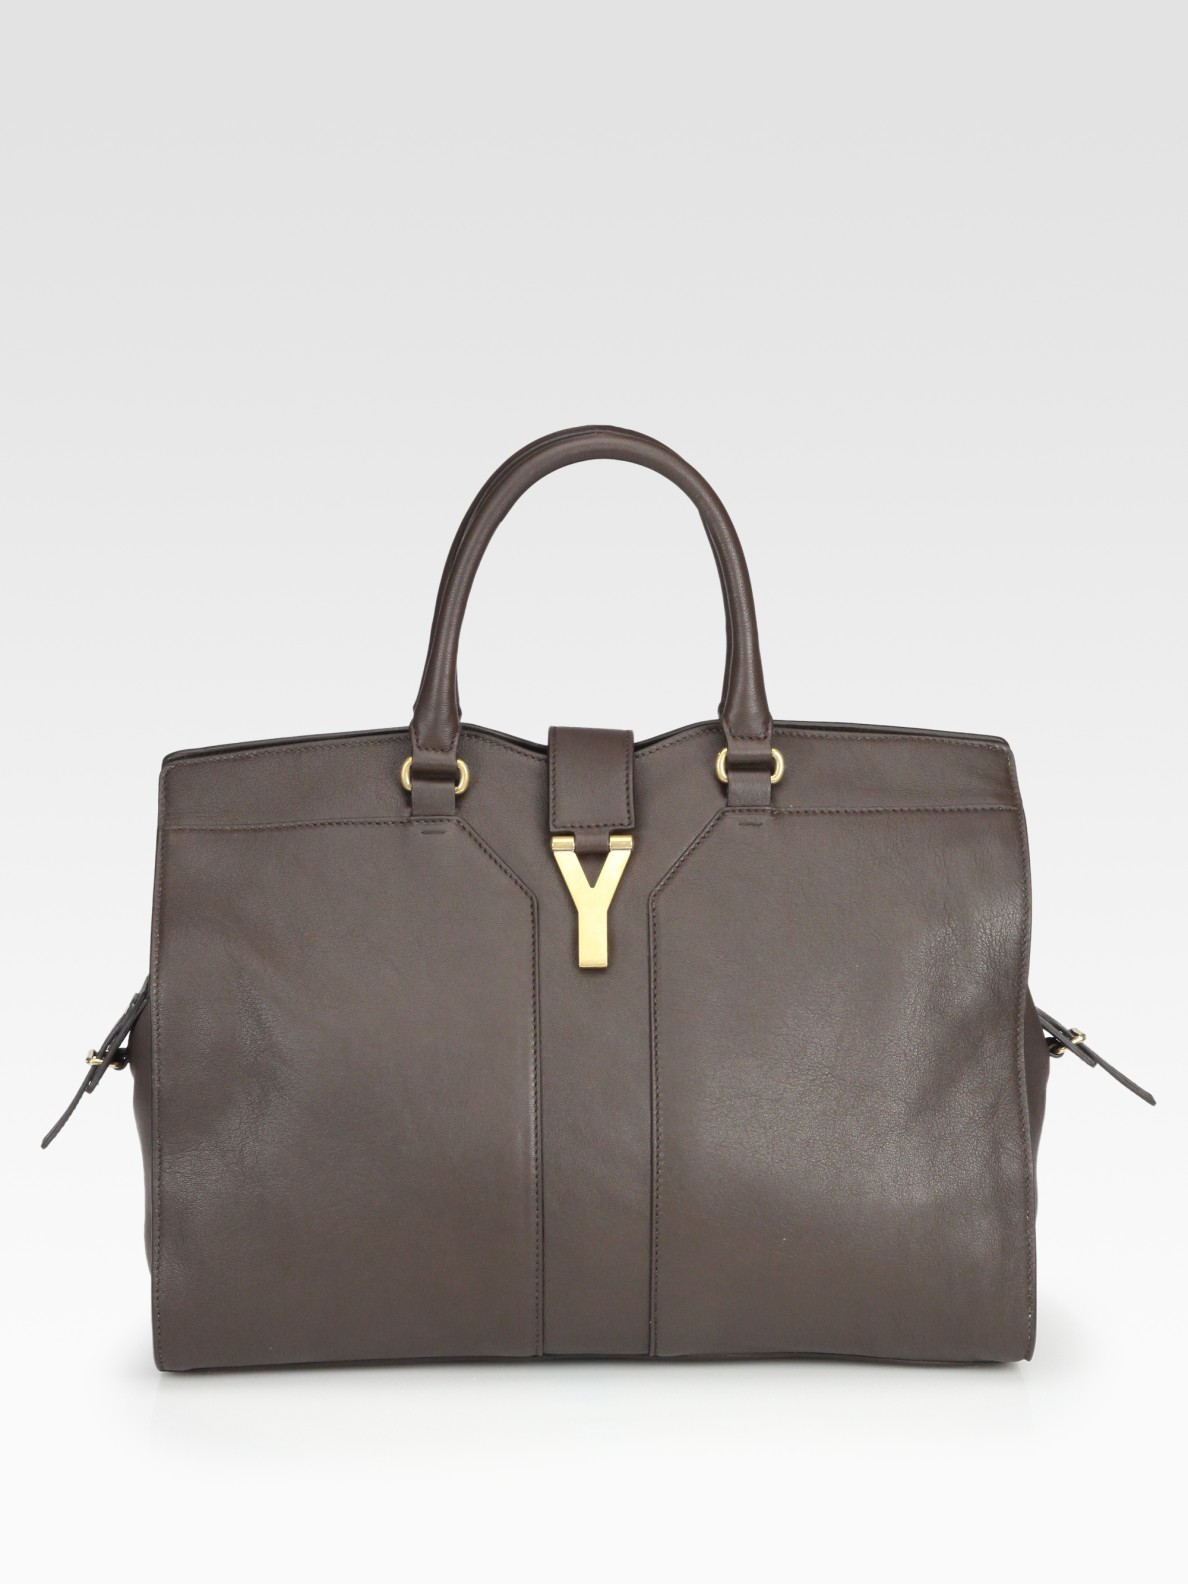 Saint Laurent Ysl Cabas Chyc Large Leather East West Bag in Gray (fondant) | Lyst